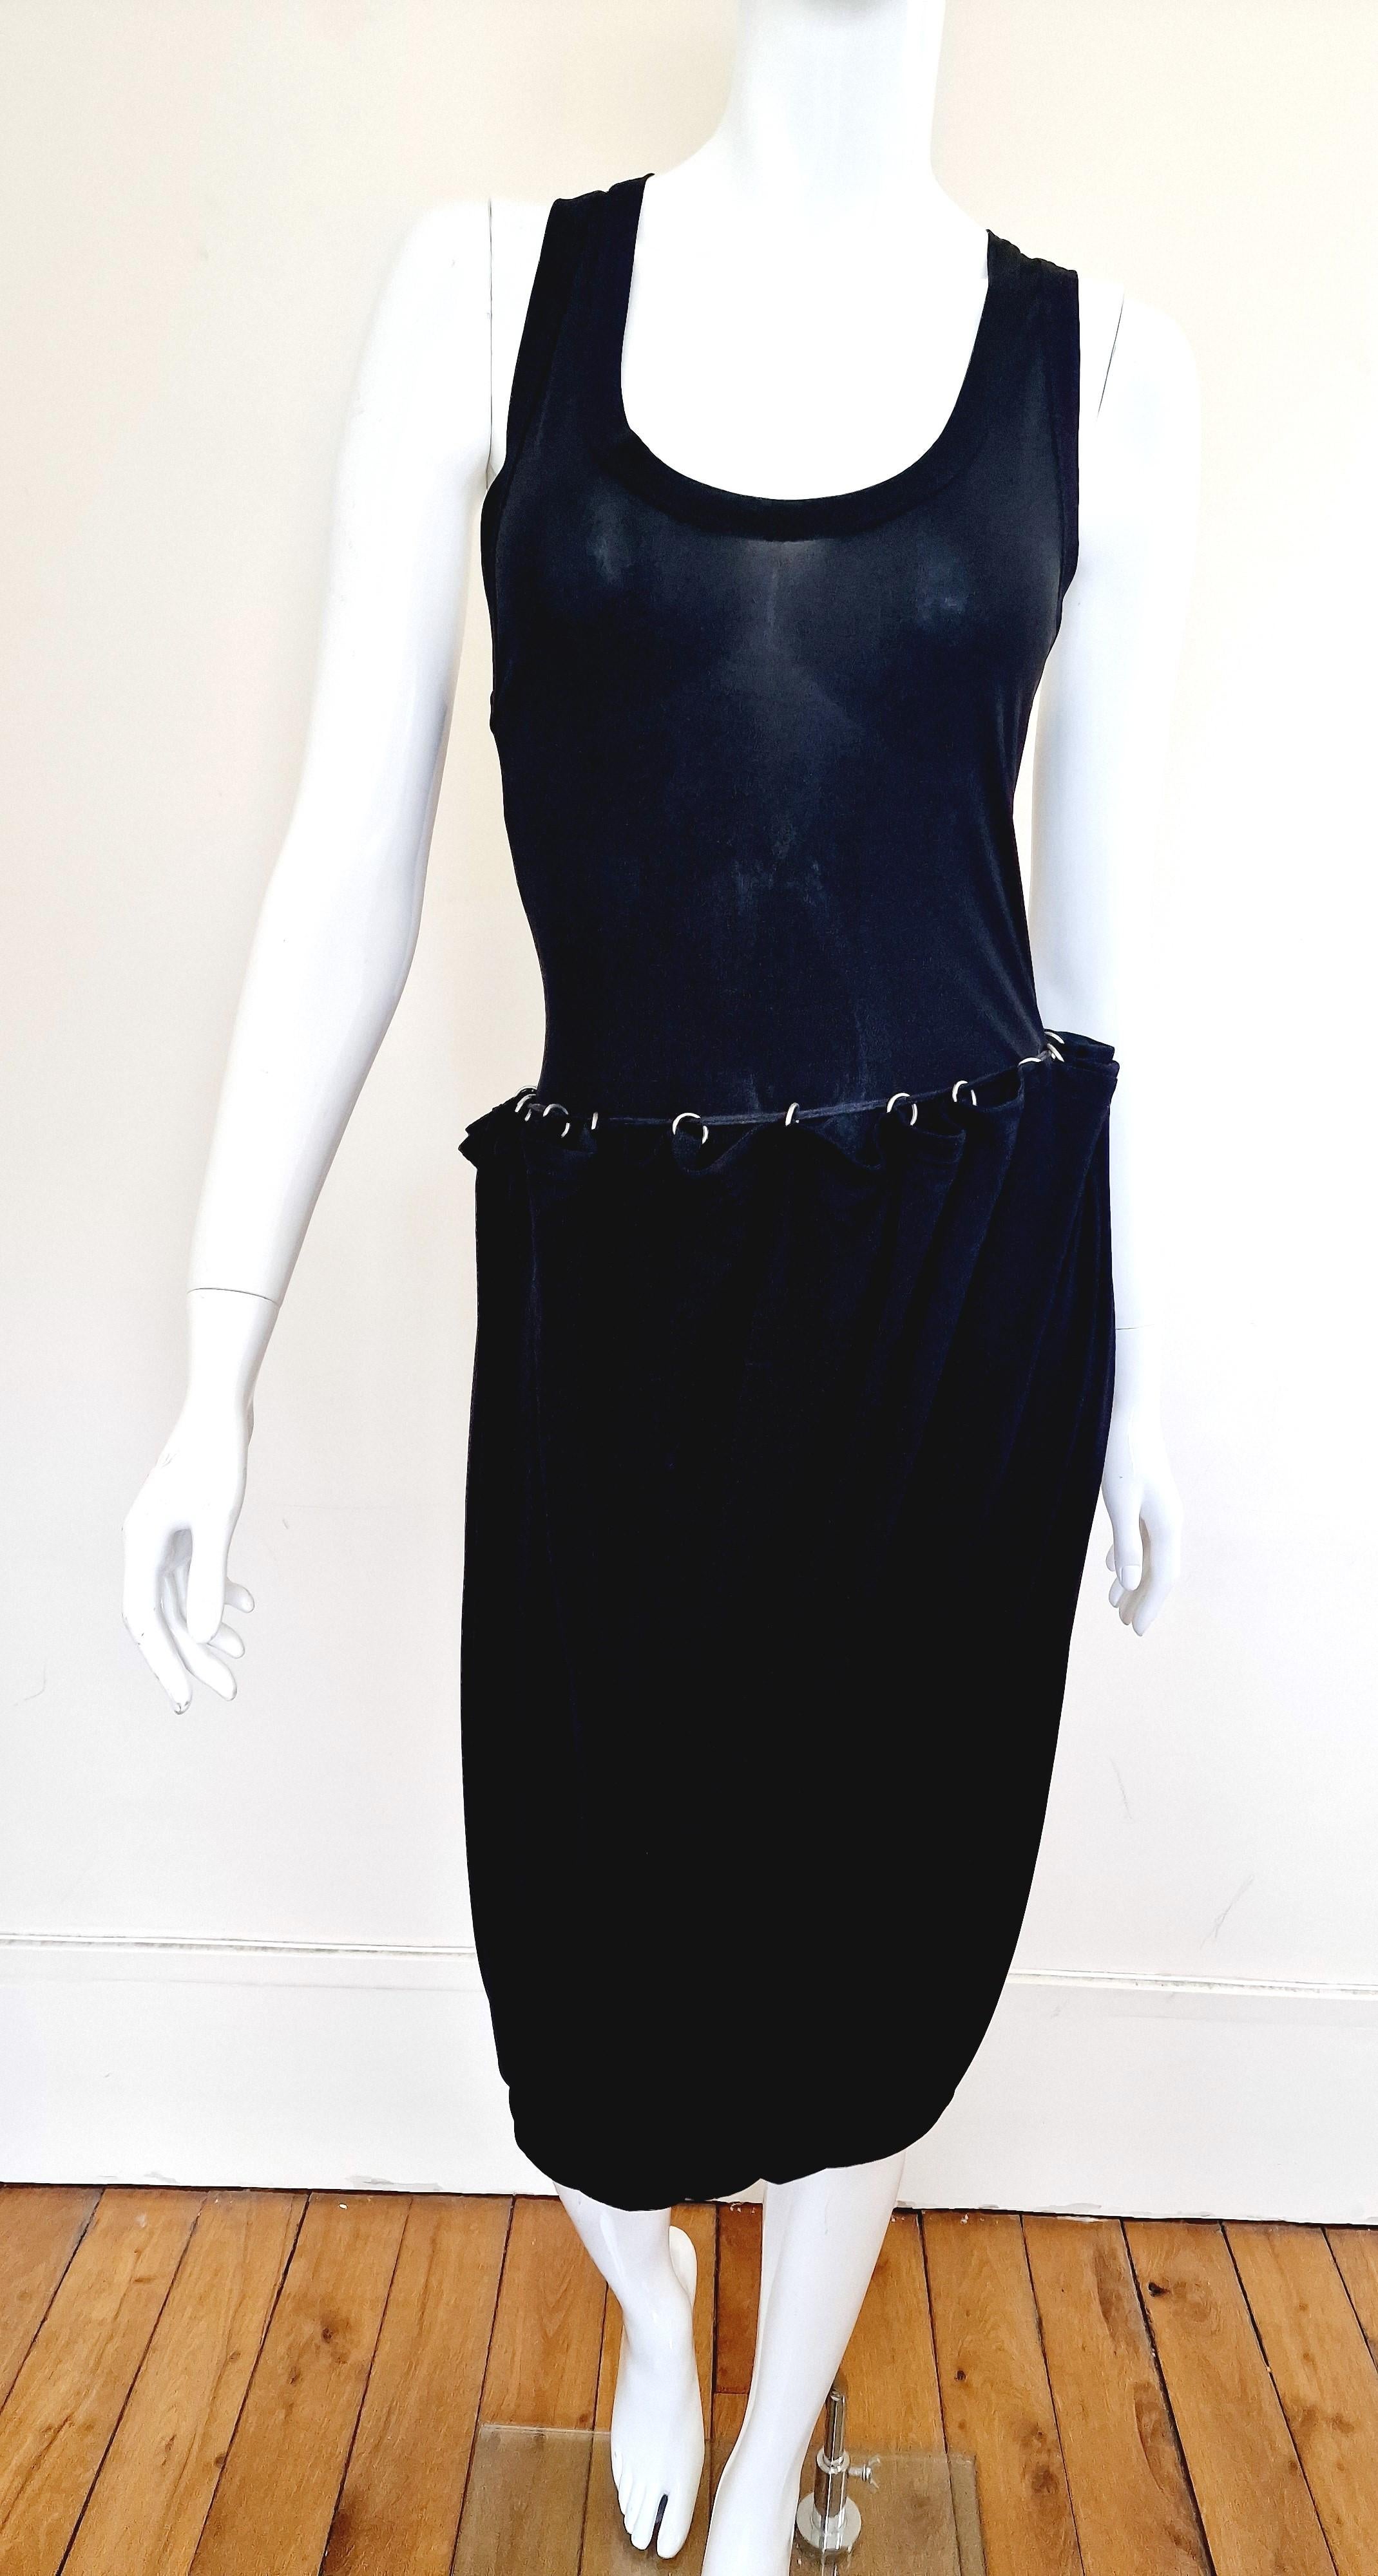 Jean Paul Gaultier Chain Metal Ring Black Vintage 90s Medium Evening Dress Gown For Sale 6